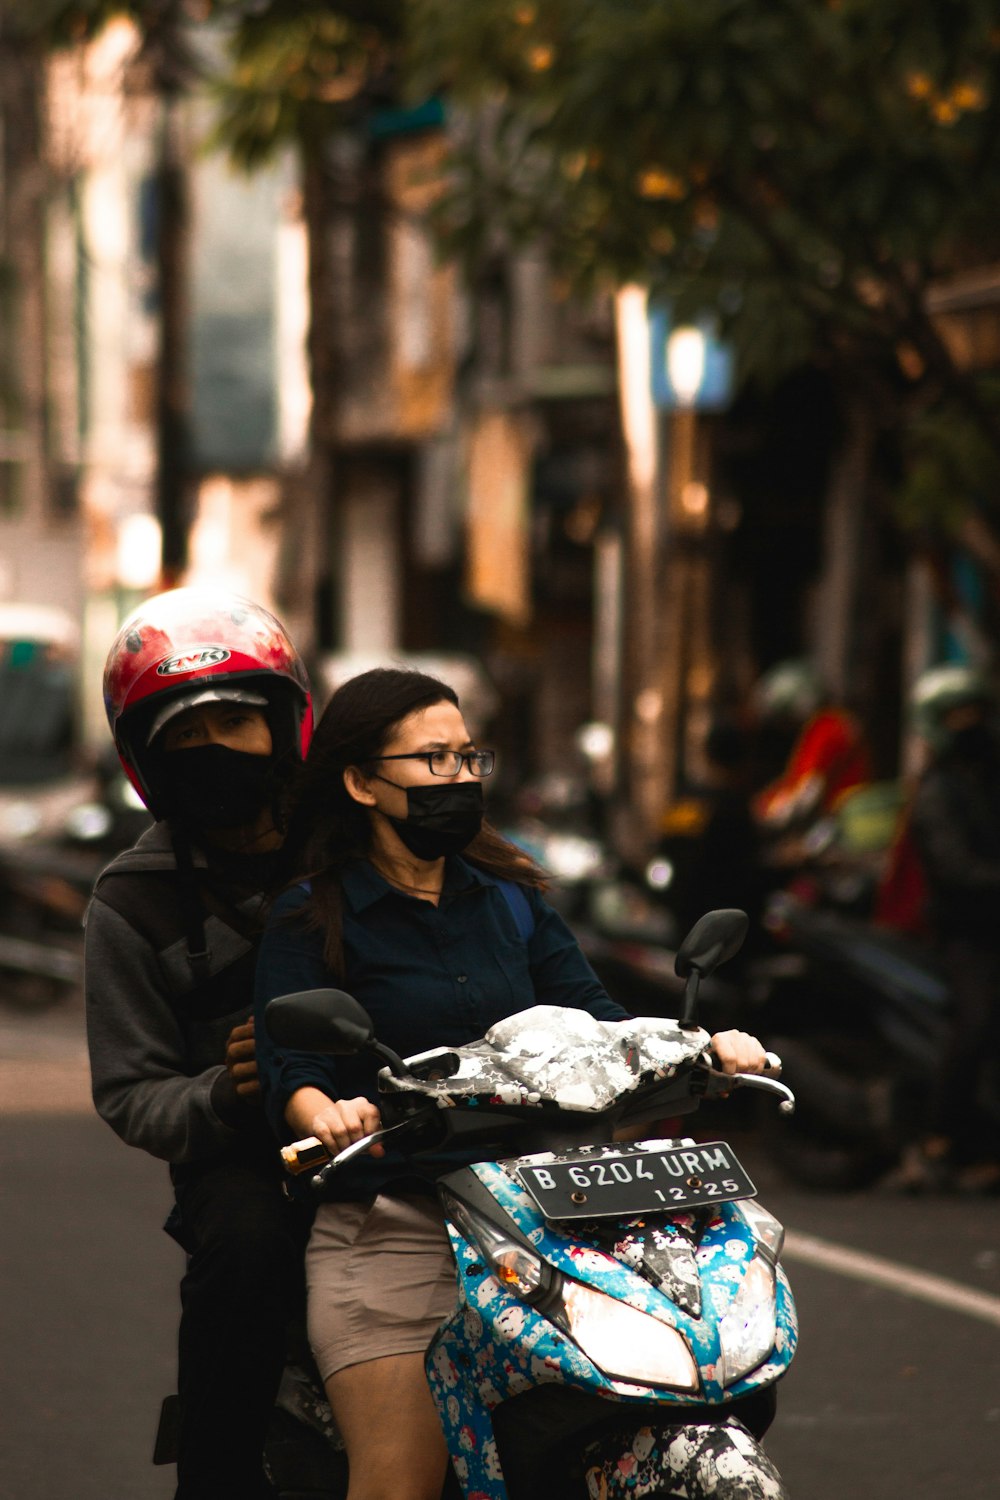 a man and a woman riding a scooter down a street